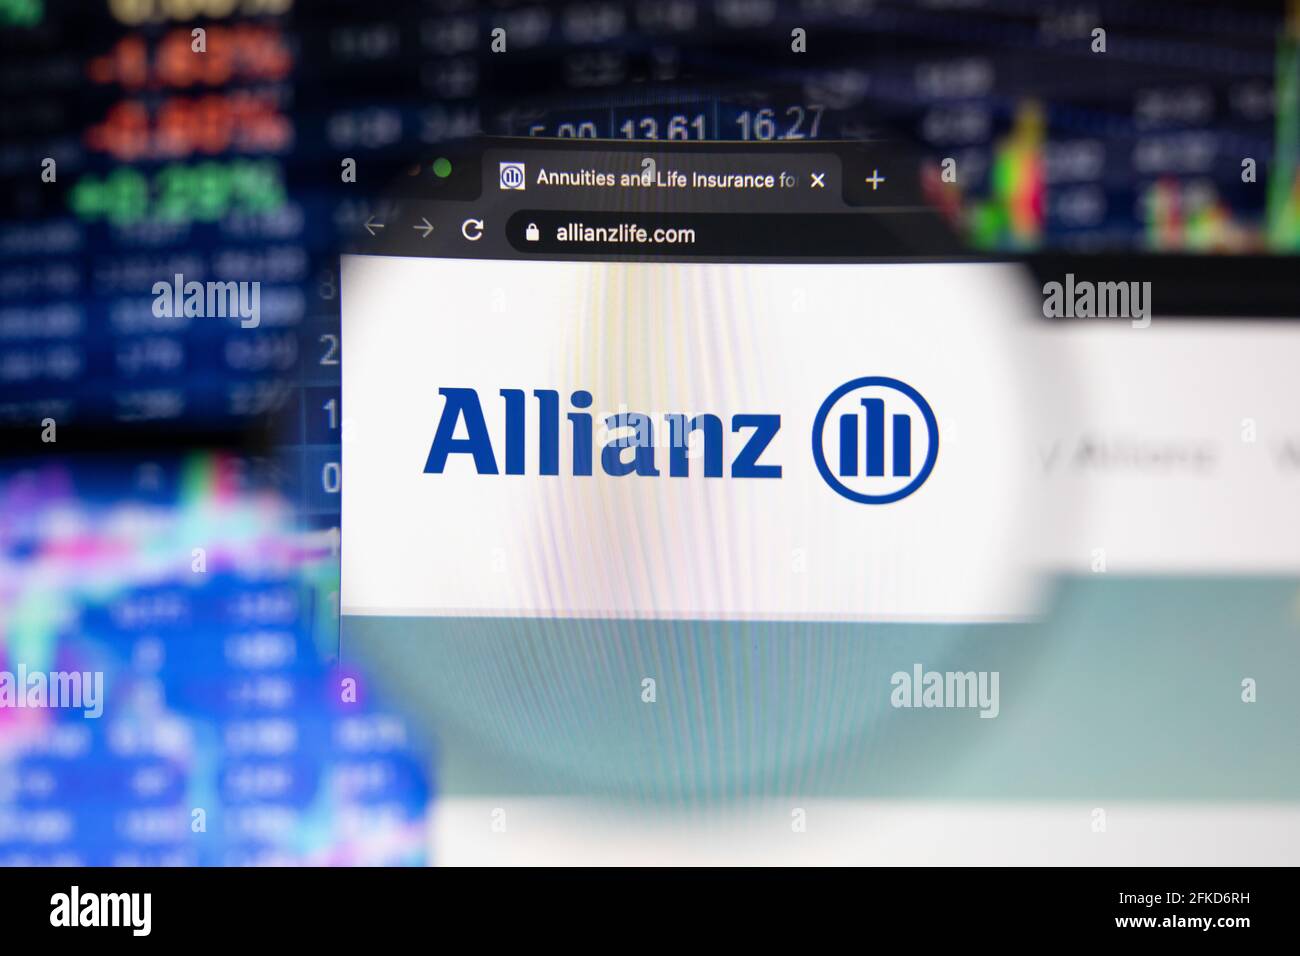 Allianz company logo on a website with blurry stock market developments in the background, seen on a computer screen through a magnifying glass Stock Photo